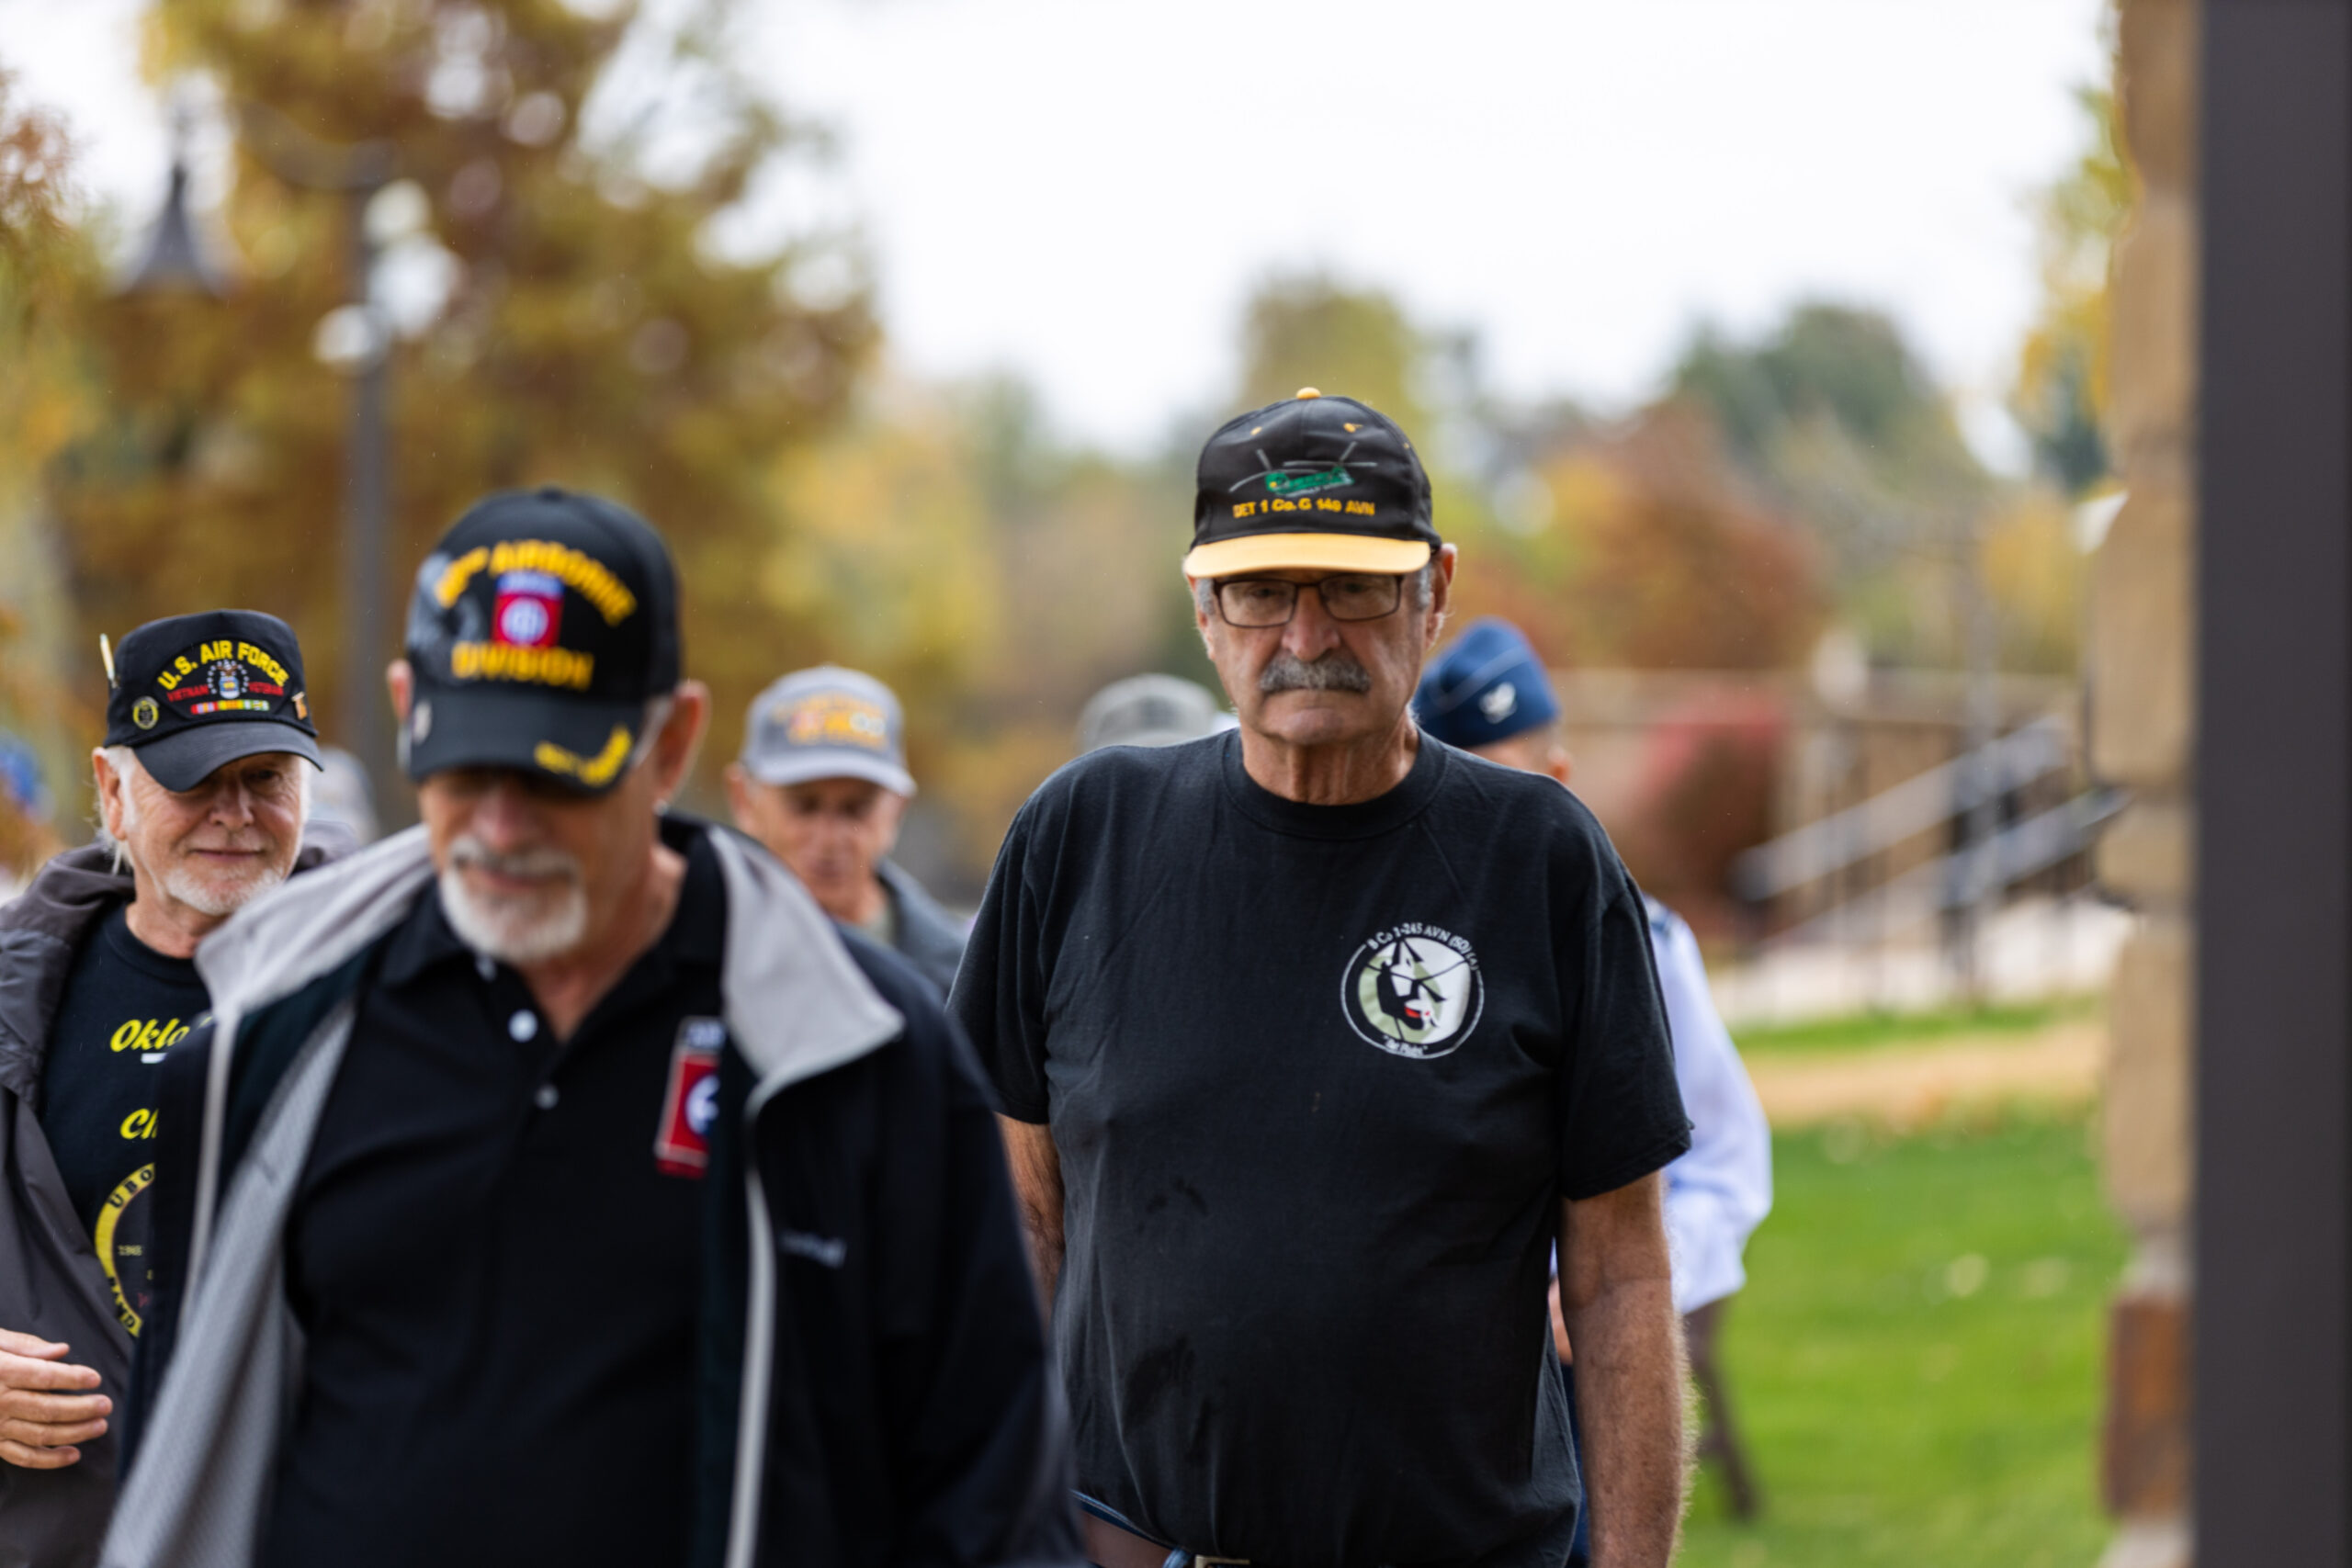 Veterans are completing the Freedom Walk at NewView's annual Veteran appreciation event.